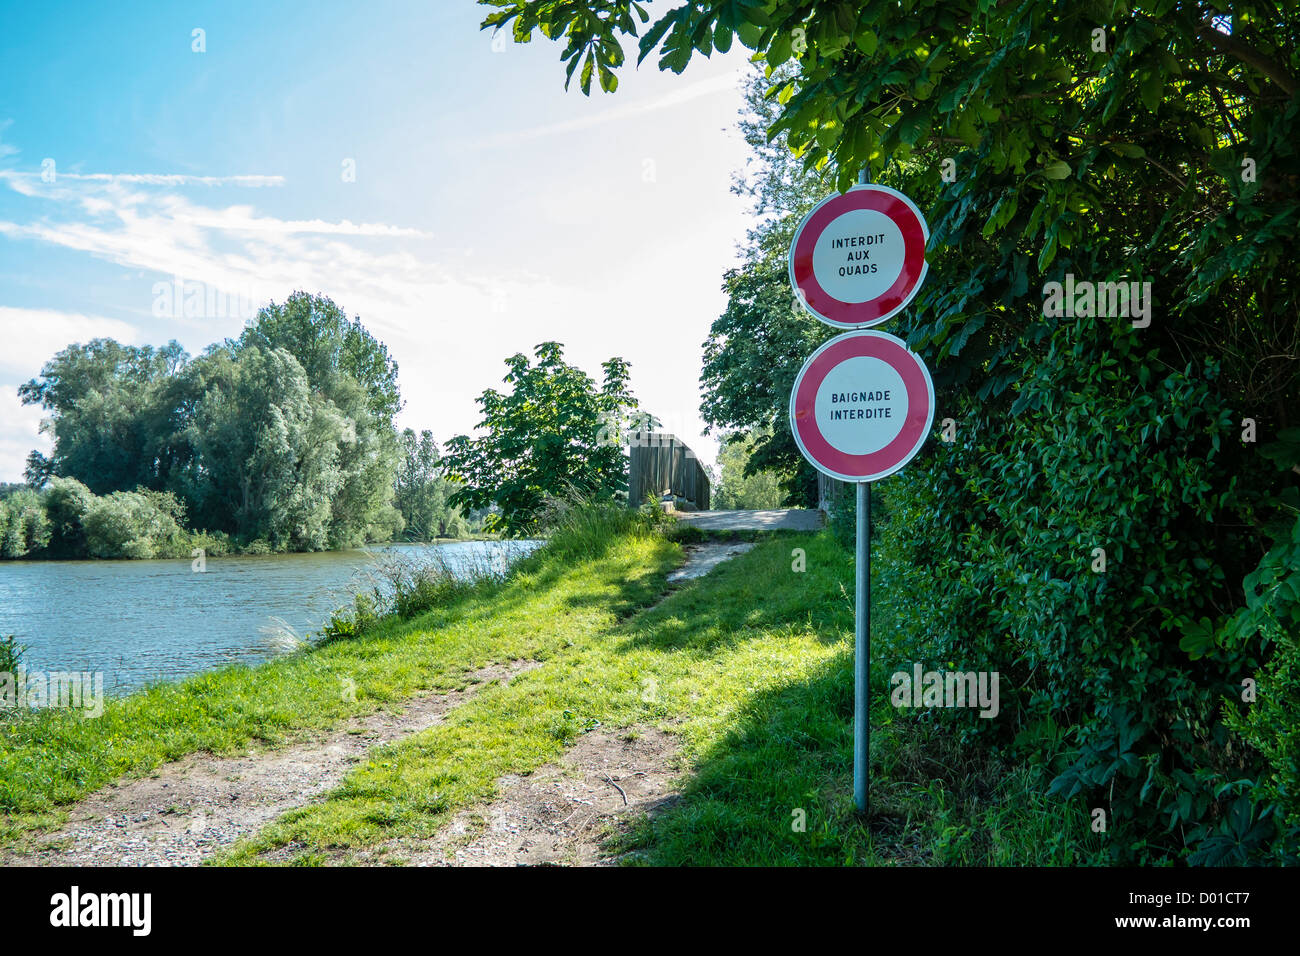 No Bathing and No Quadbike sins on the canal bank at Houlle, Pas-de-Calais, France. Stock Photo